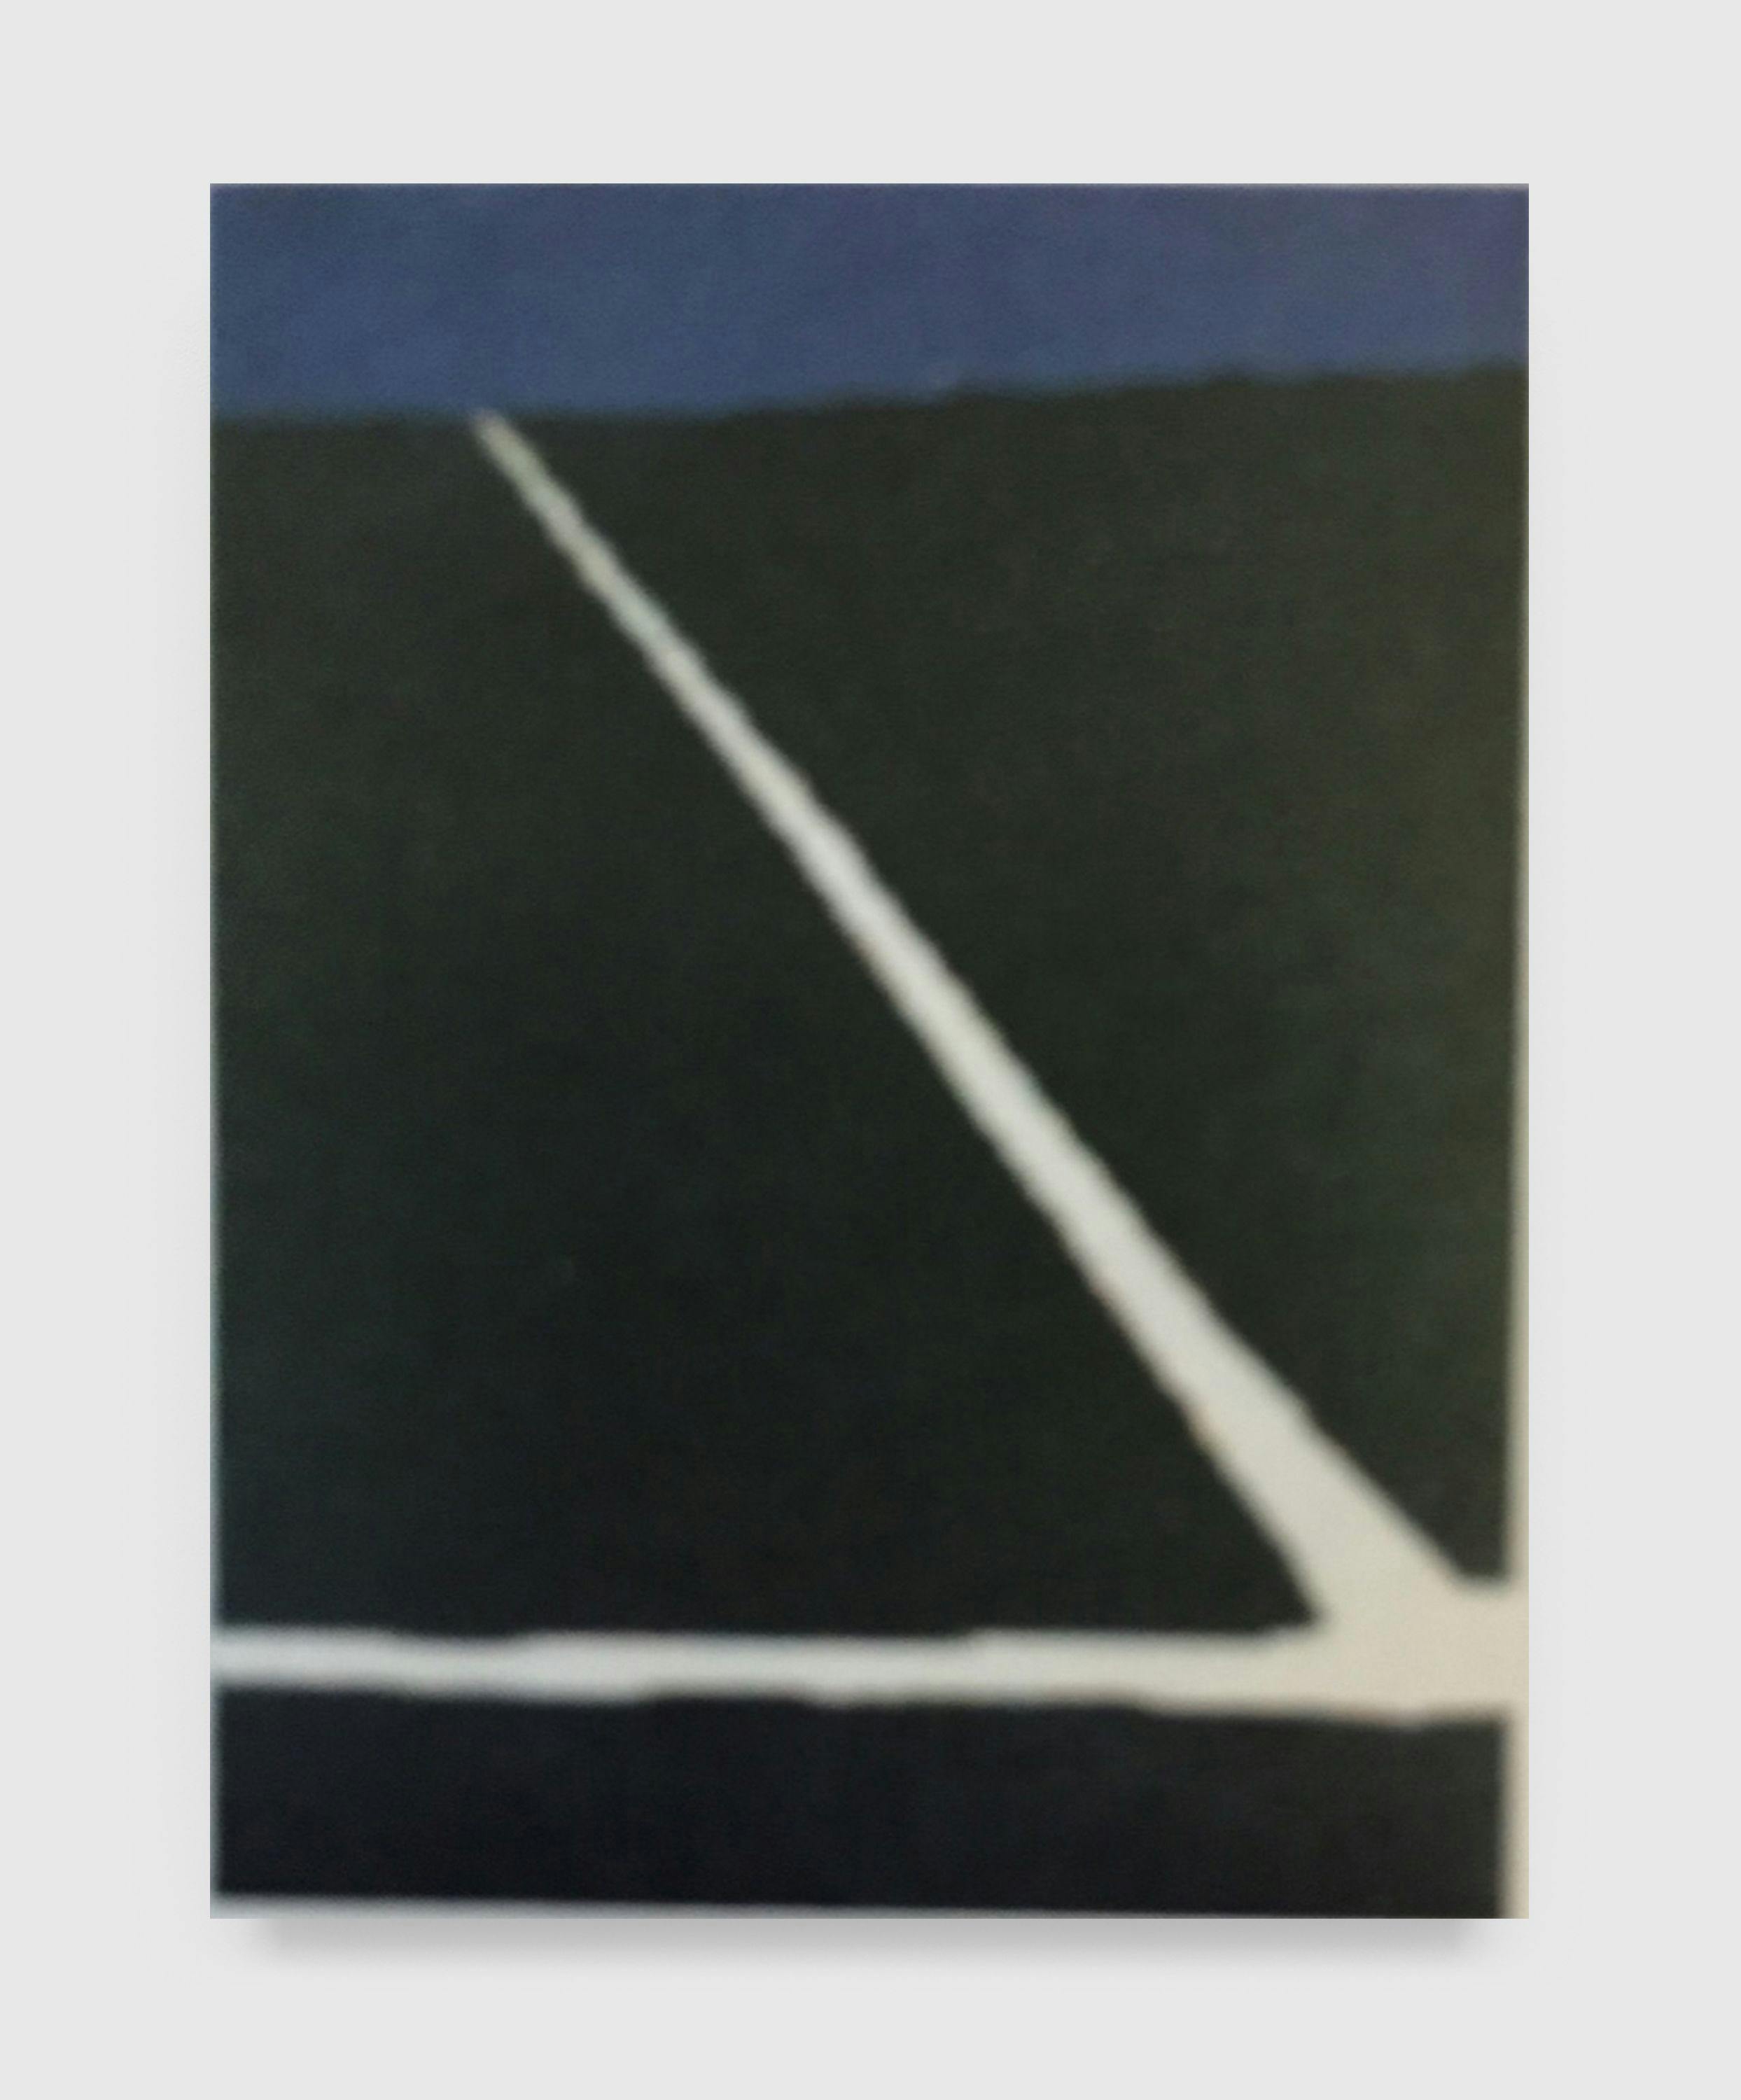 A painting by Raoul De Keyser, titled Middellijn, dated 1970.